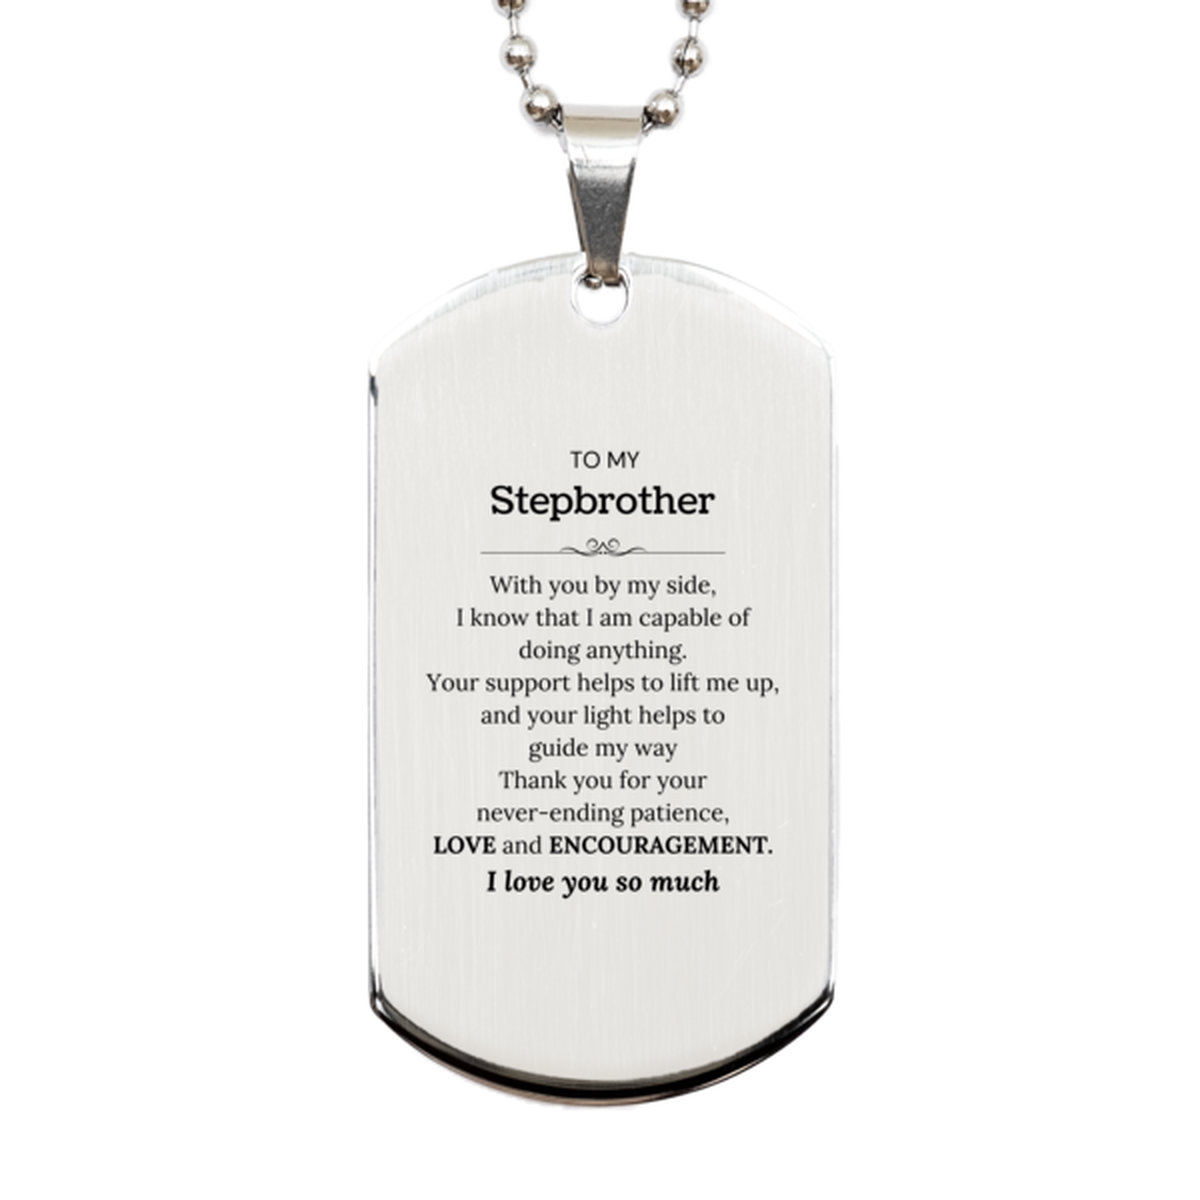 Appreciation Stepbrother Silver Dog Tag Gifts, To My Stepbrother Birthday Christmas Wedding Keepsake Gifts for Stepbrother With you by my side, I know that I am capable of doing anything. I love you so much